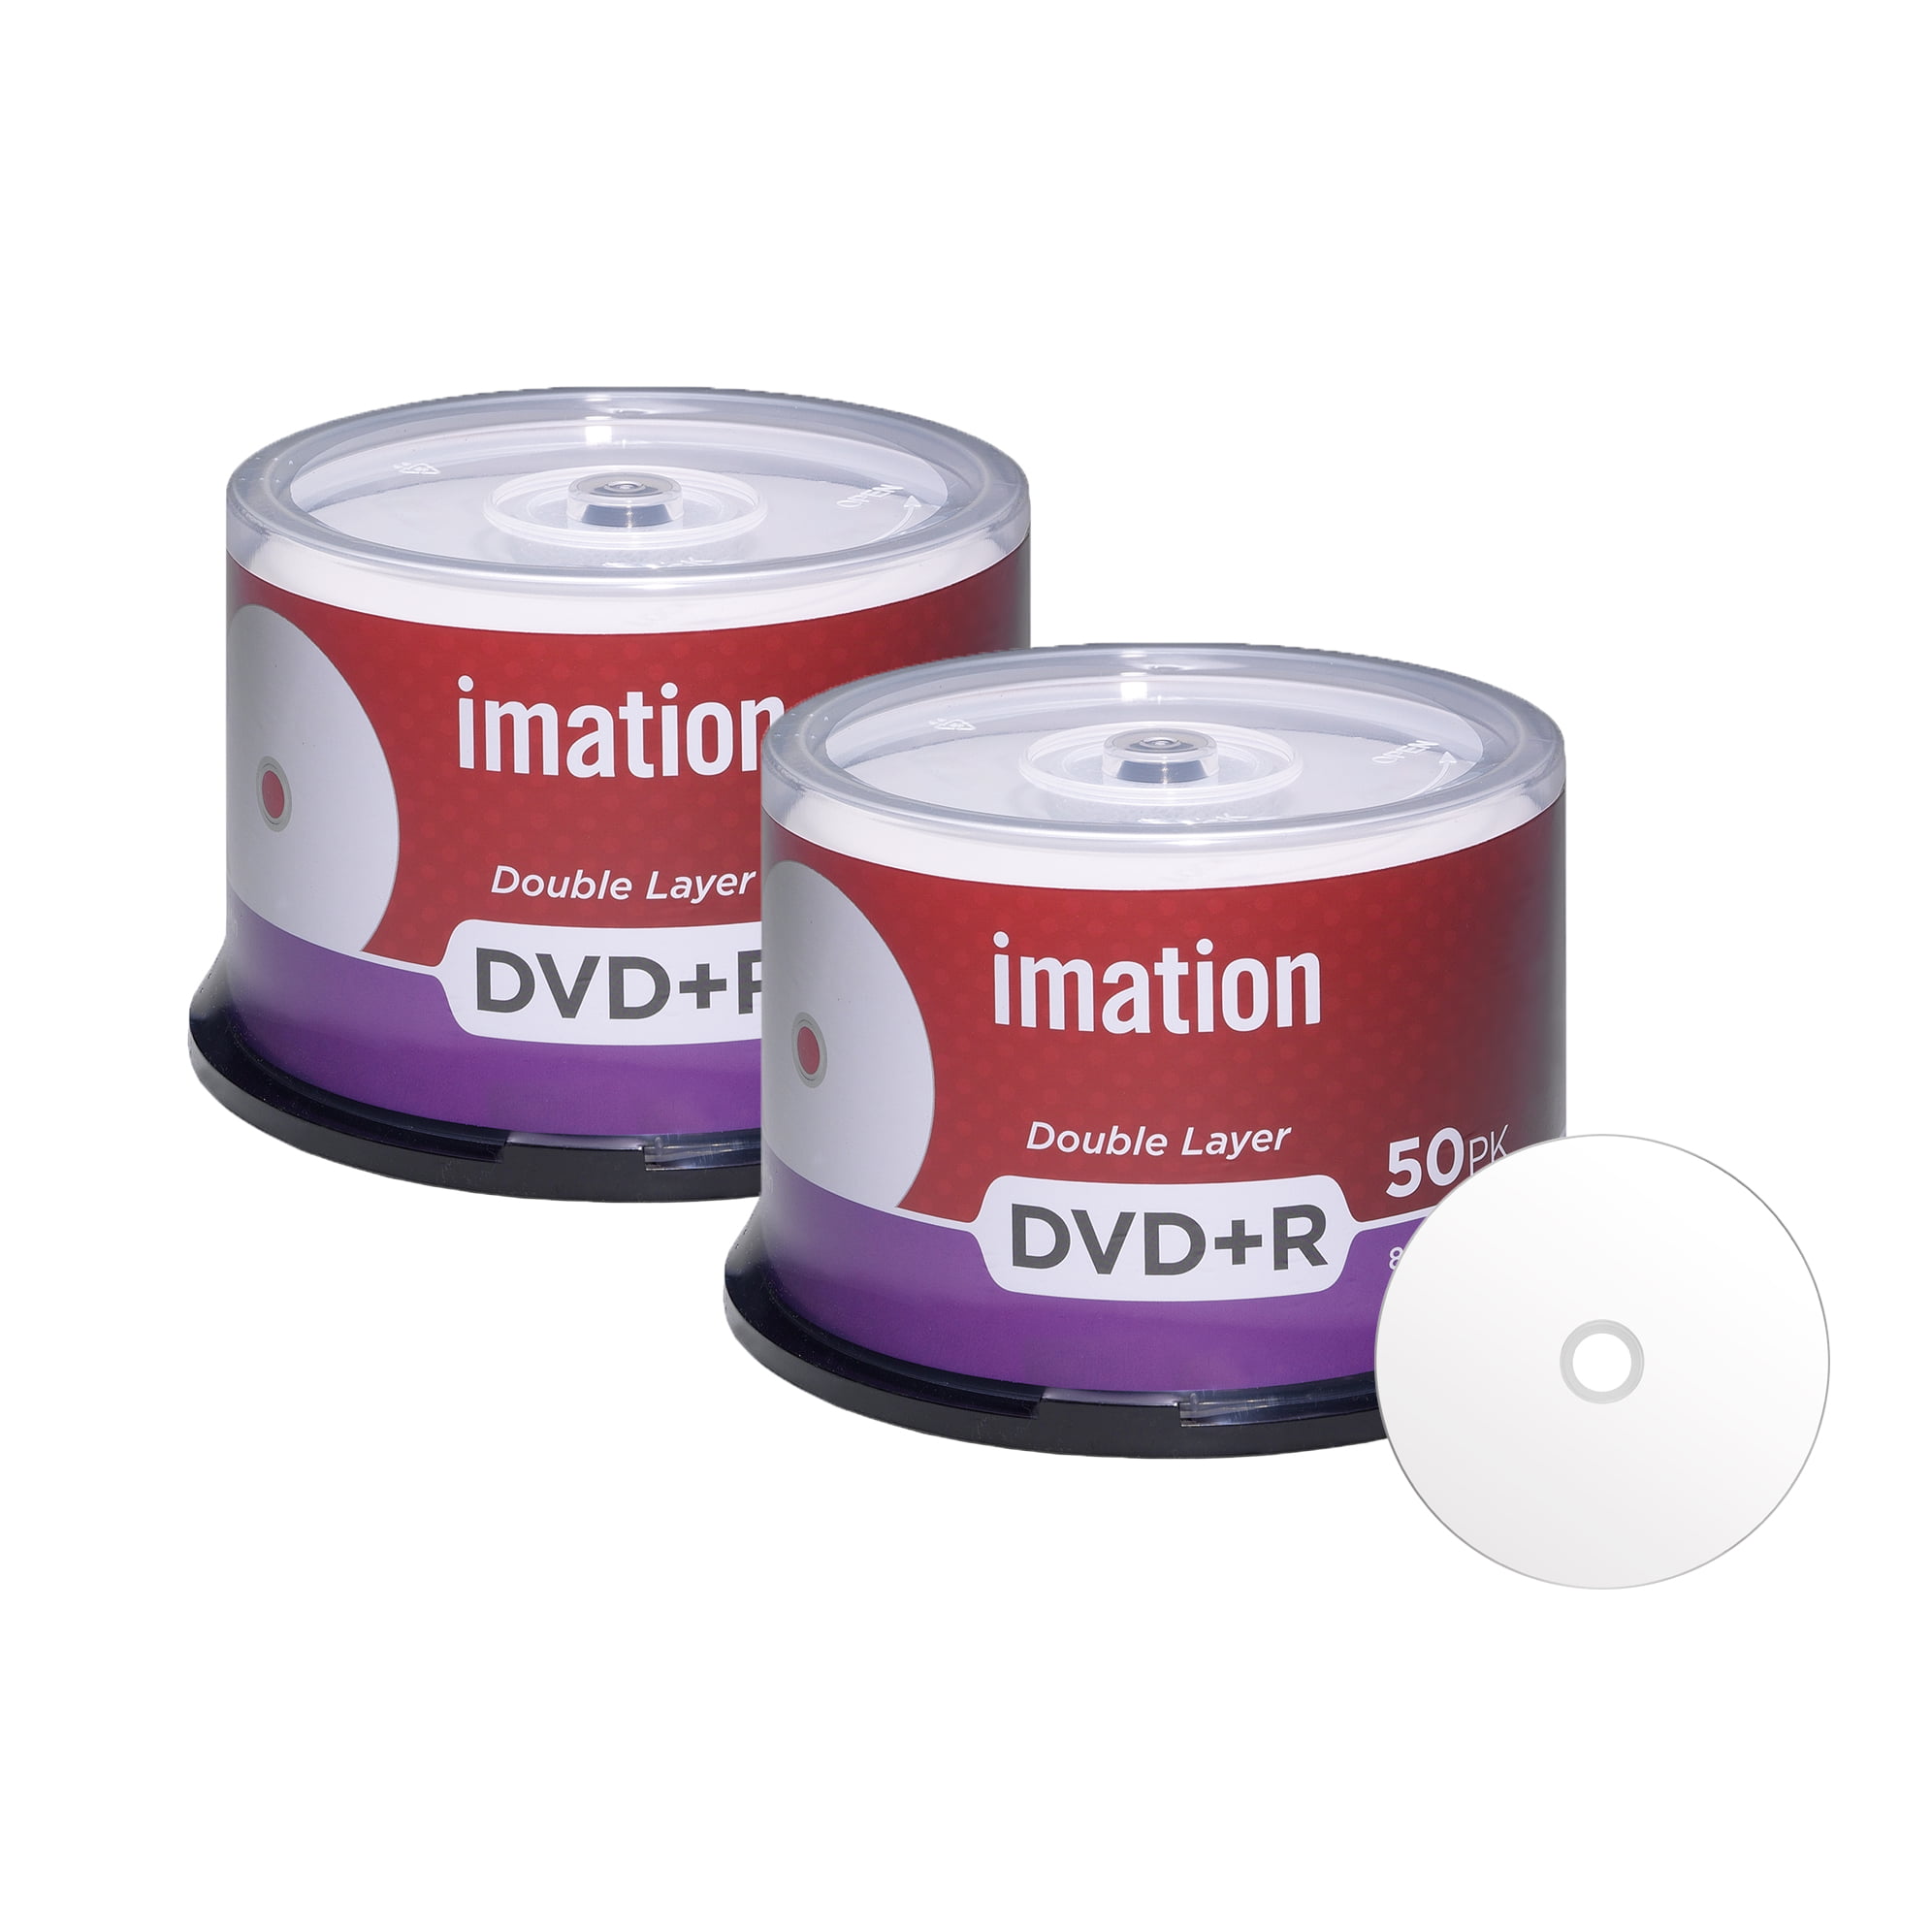 100-pack-imation-dvd-r-dl-dual-layer-8x-8-5gb-dvd-plus-r-double-layer